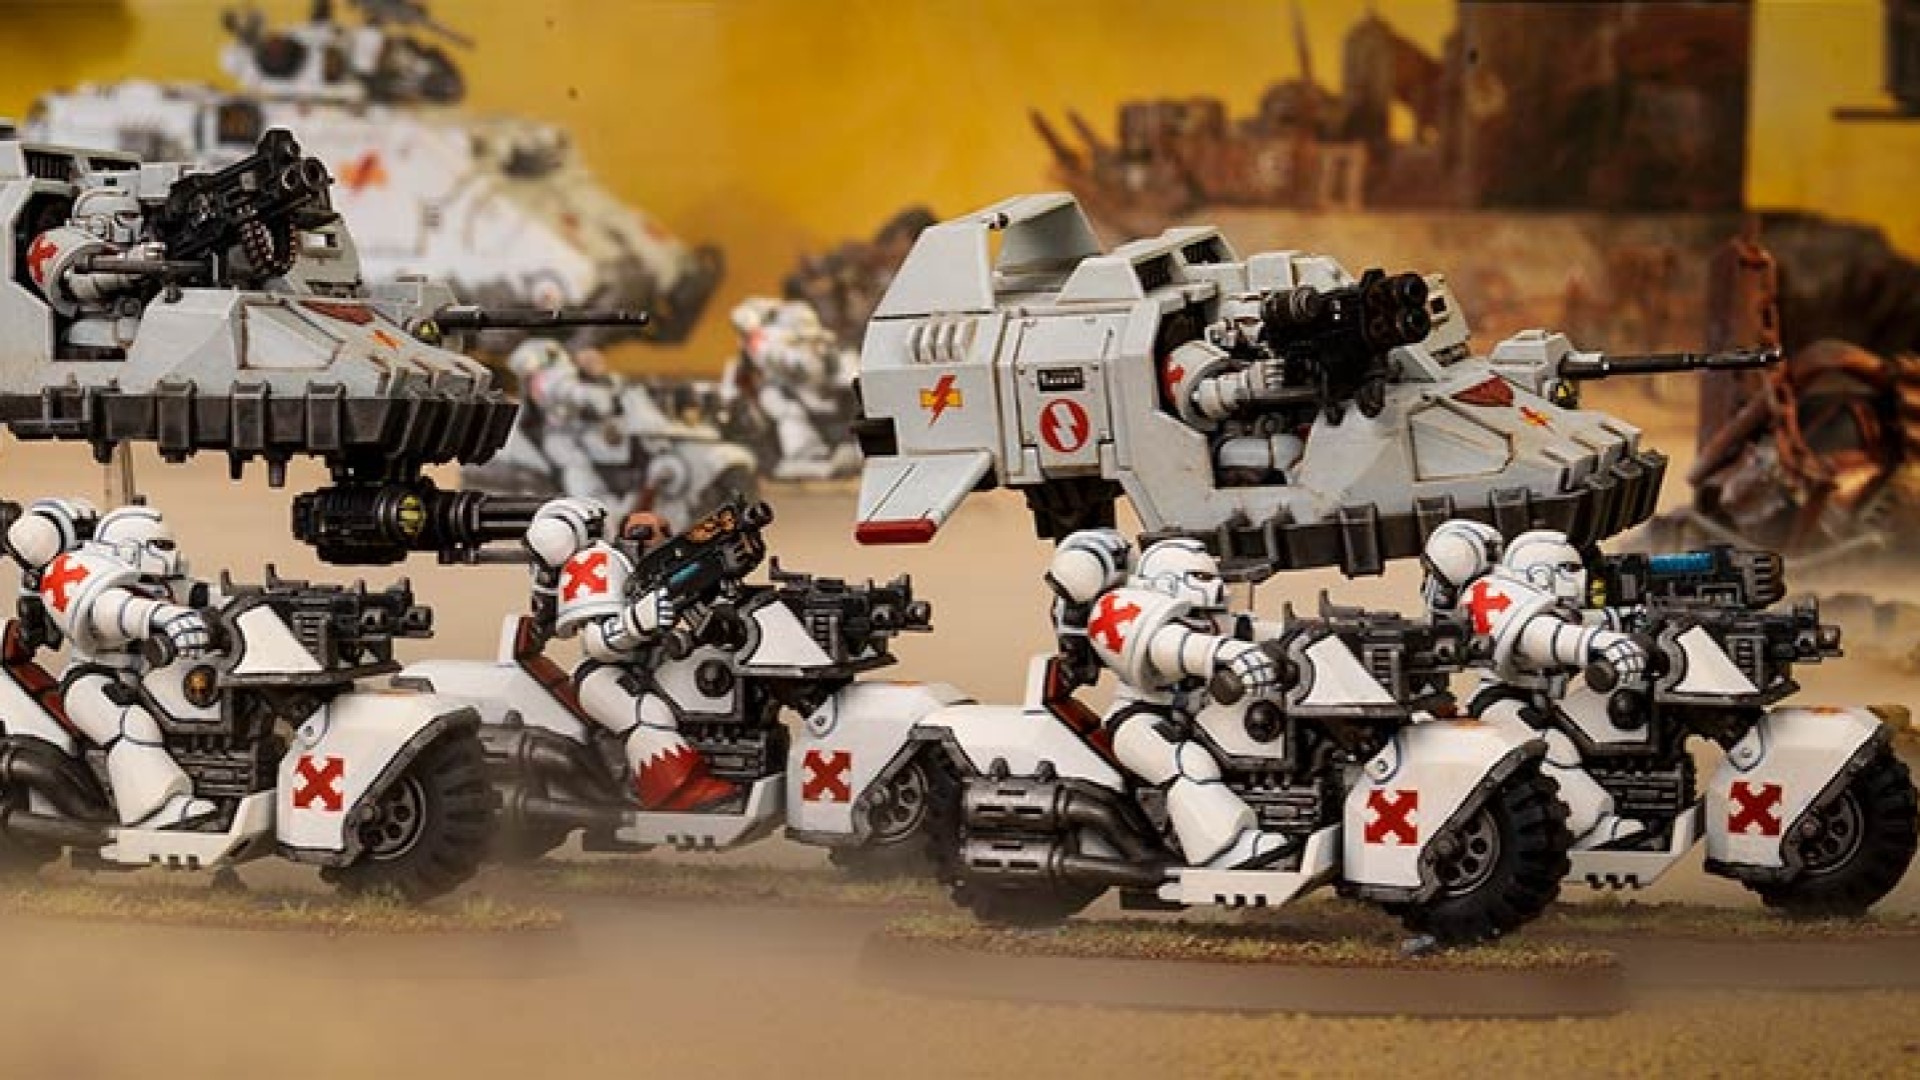 MANY UNITS TO CHOOSE FROM WARHAMMER 40K SPACE MARINES ARMY WHITE SCARS